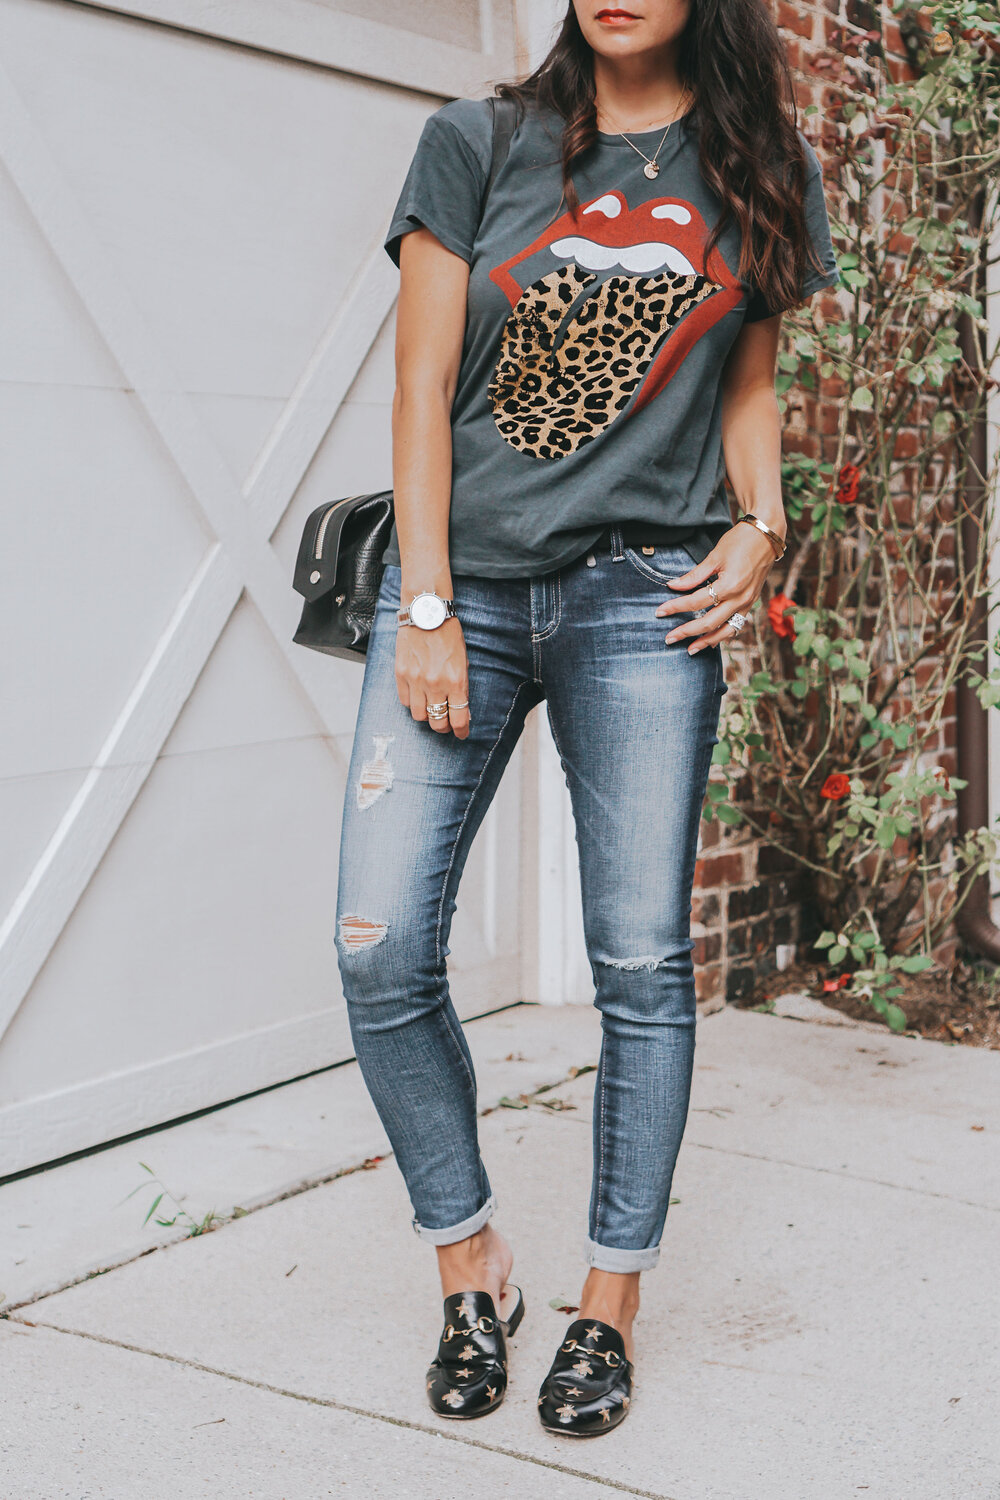 Cute Band Tee Outfit, Gucci Mules